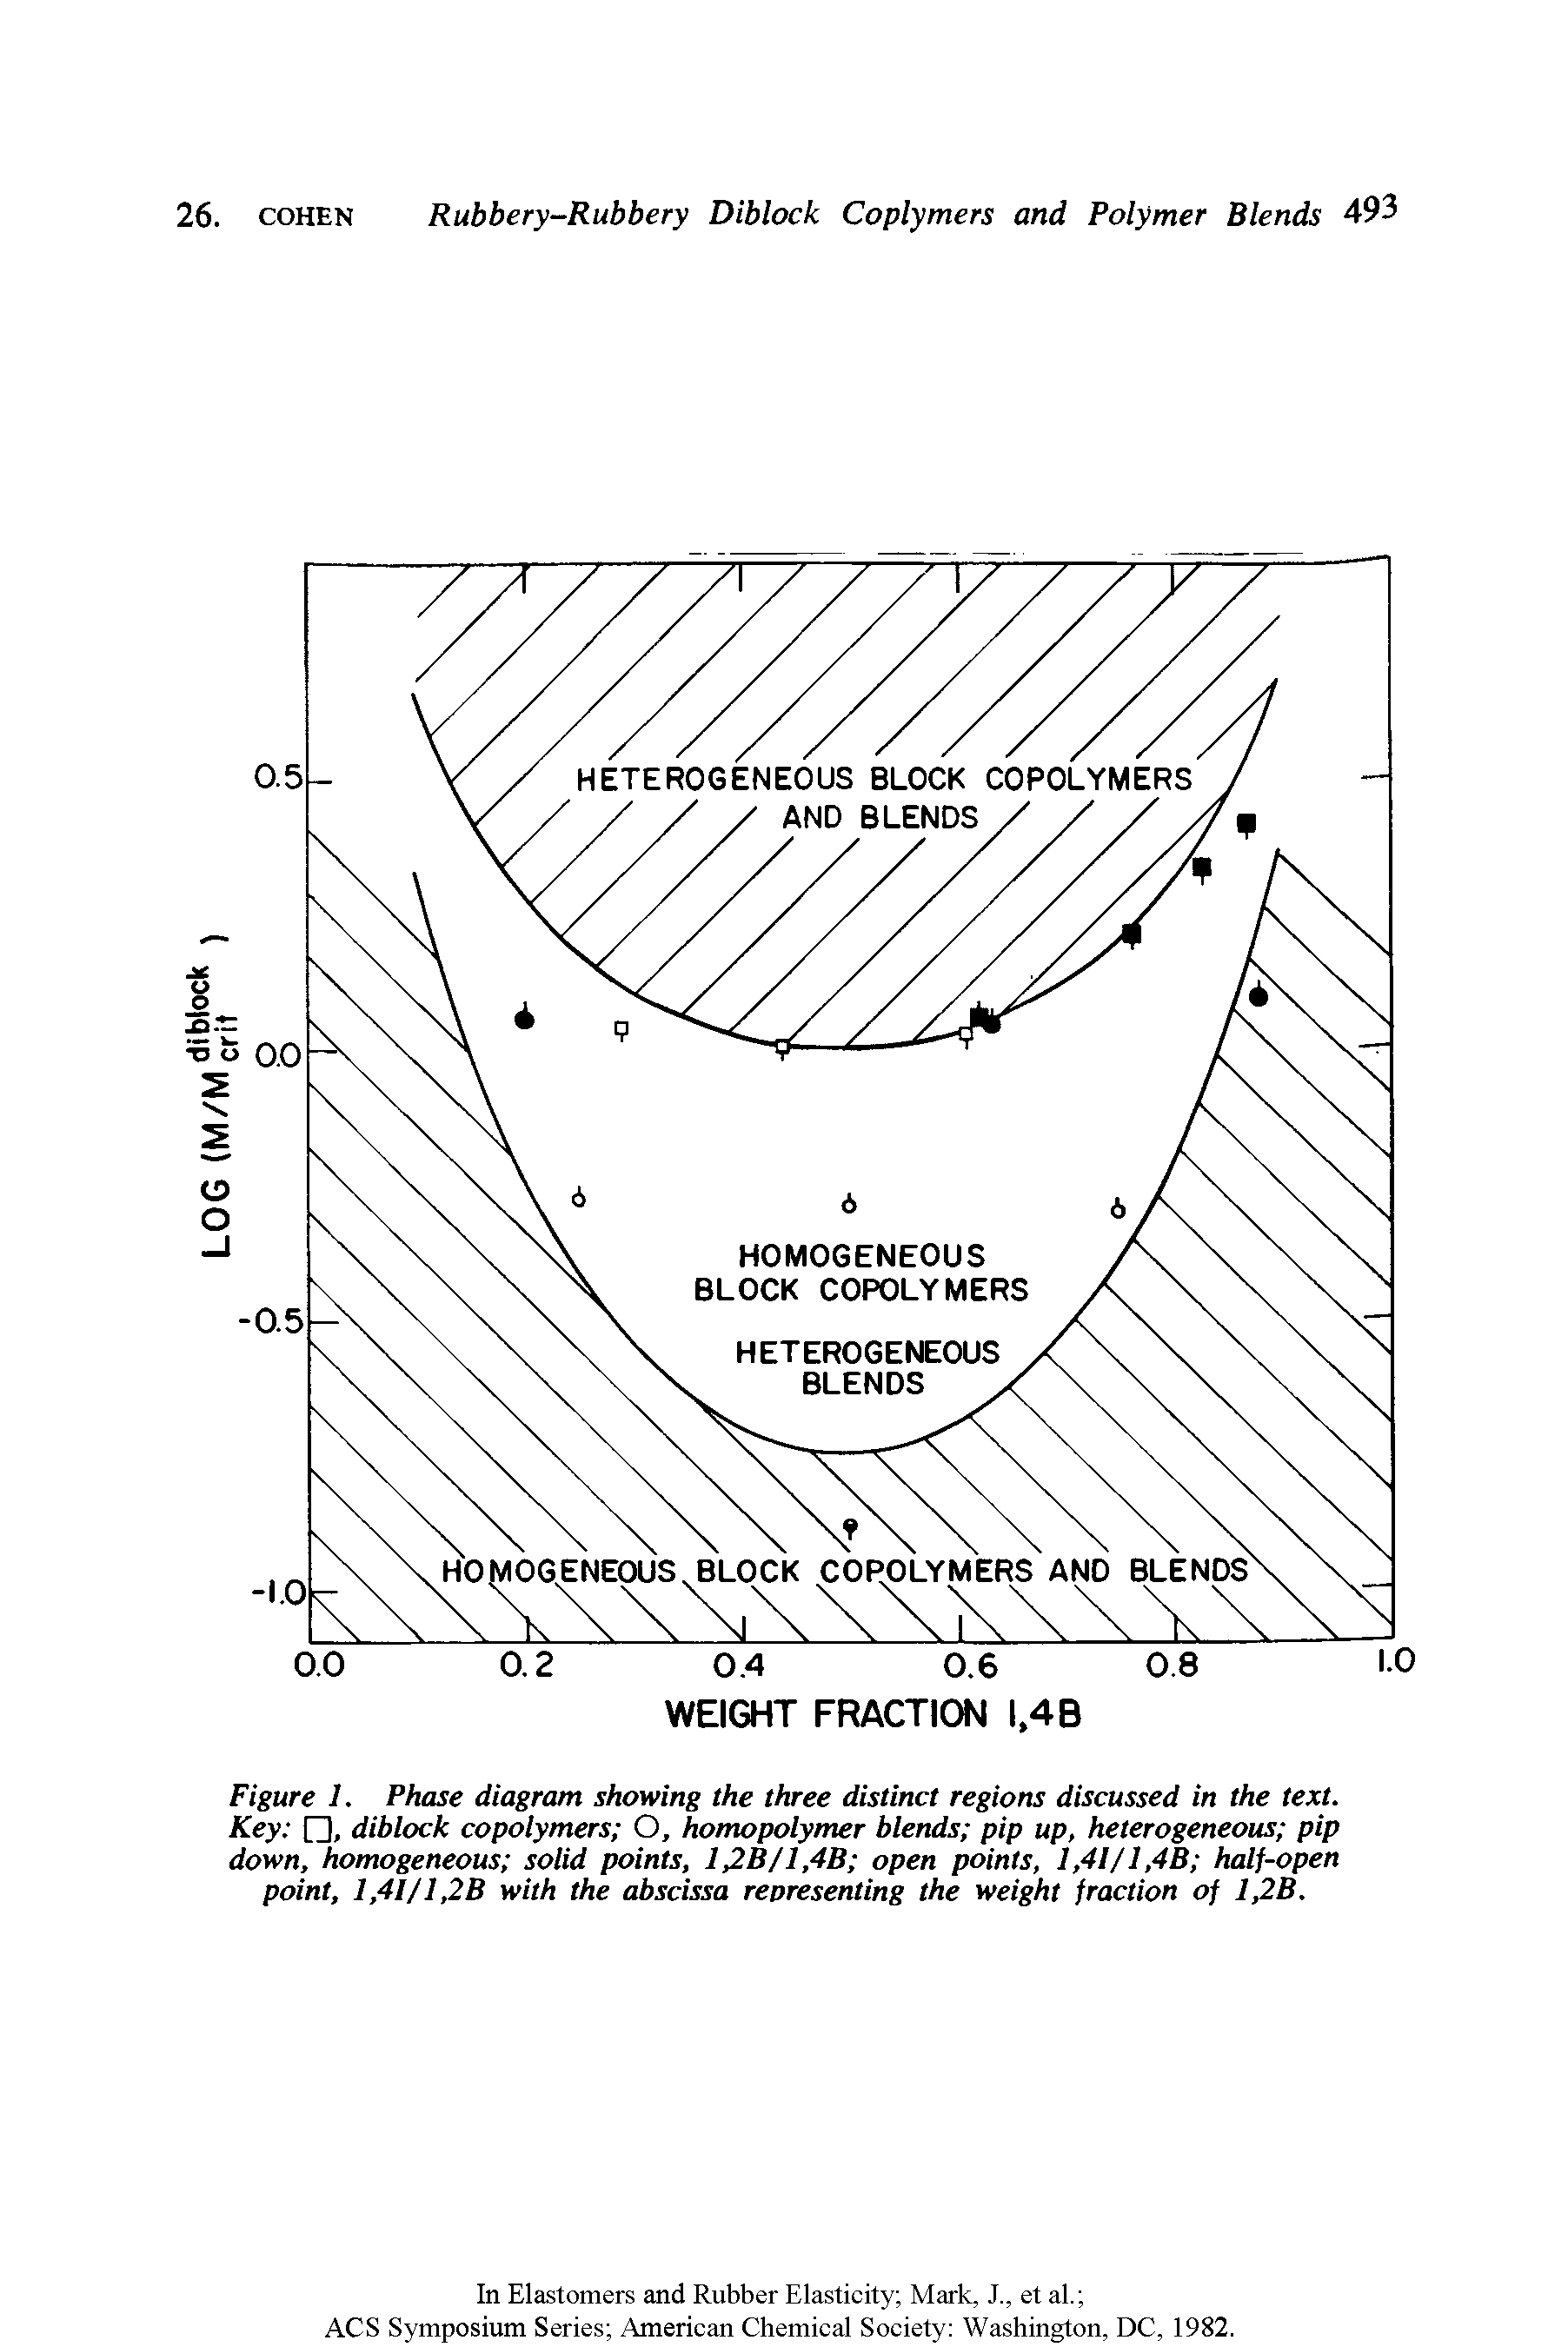 Figure 1. Phase diagram showing the three distinct regions discussed in the text. Key n, diblock copolymers O, homopolymer blends pip up, heterogeneous pip down, homogeneous solid points, 12B/1,4B open points, l,4l/l,4B half-open point, 1,4I/1,2B with the abscissa representing the weight fraction of 1,2B.